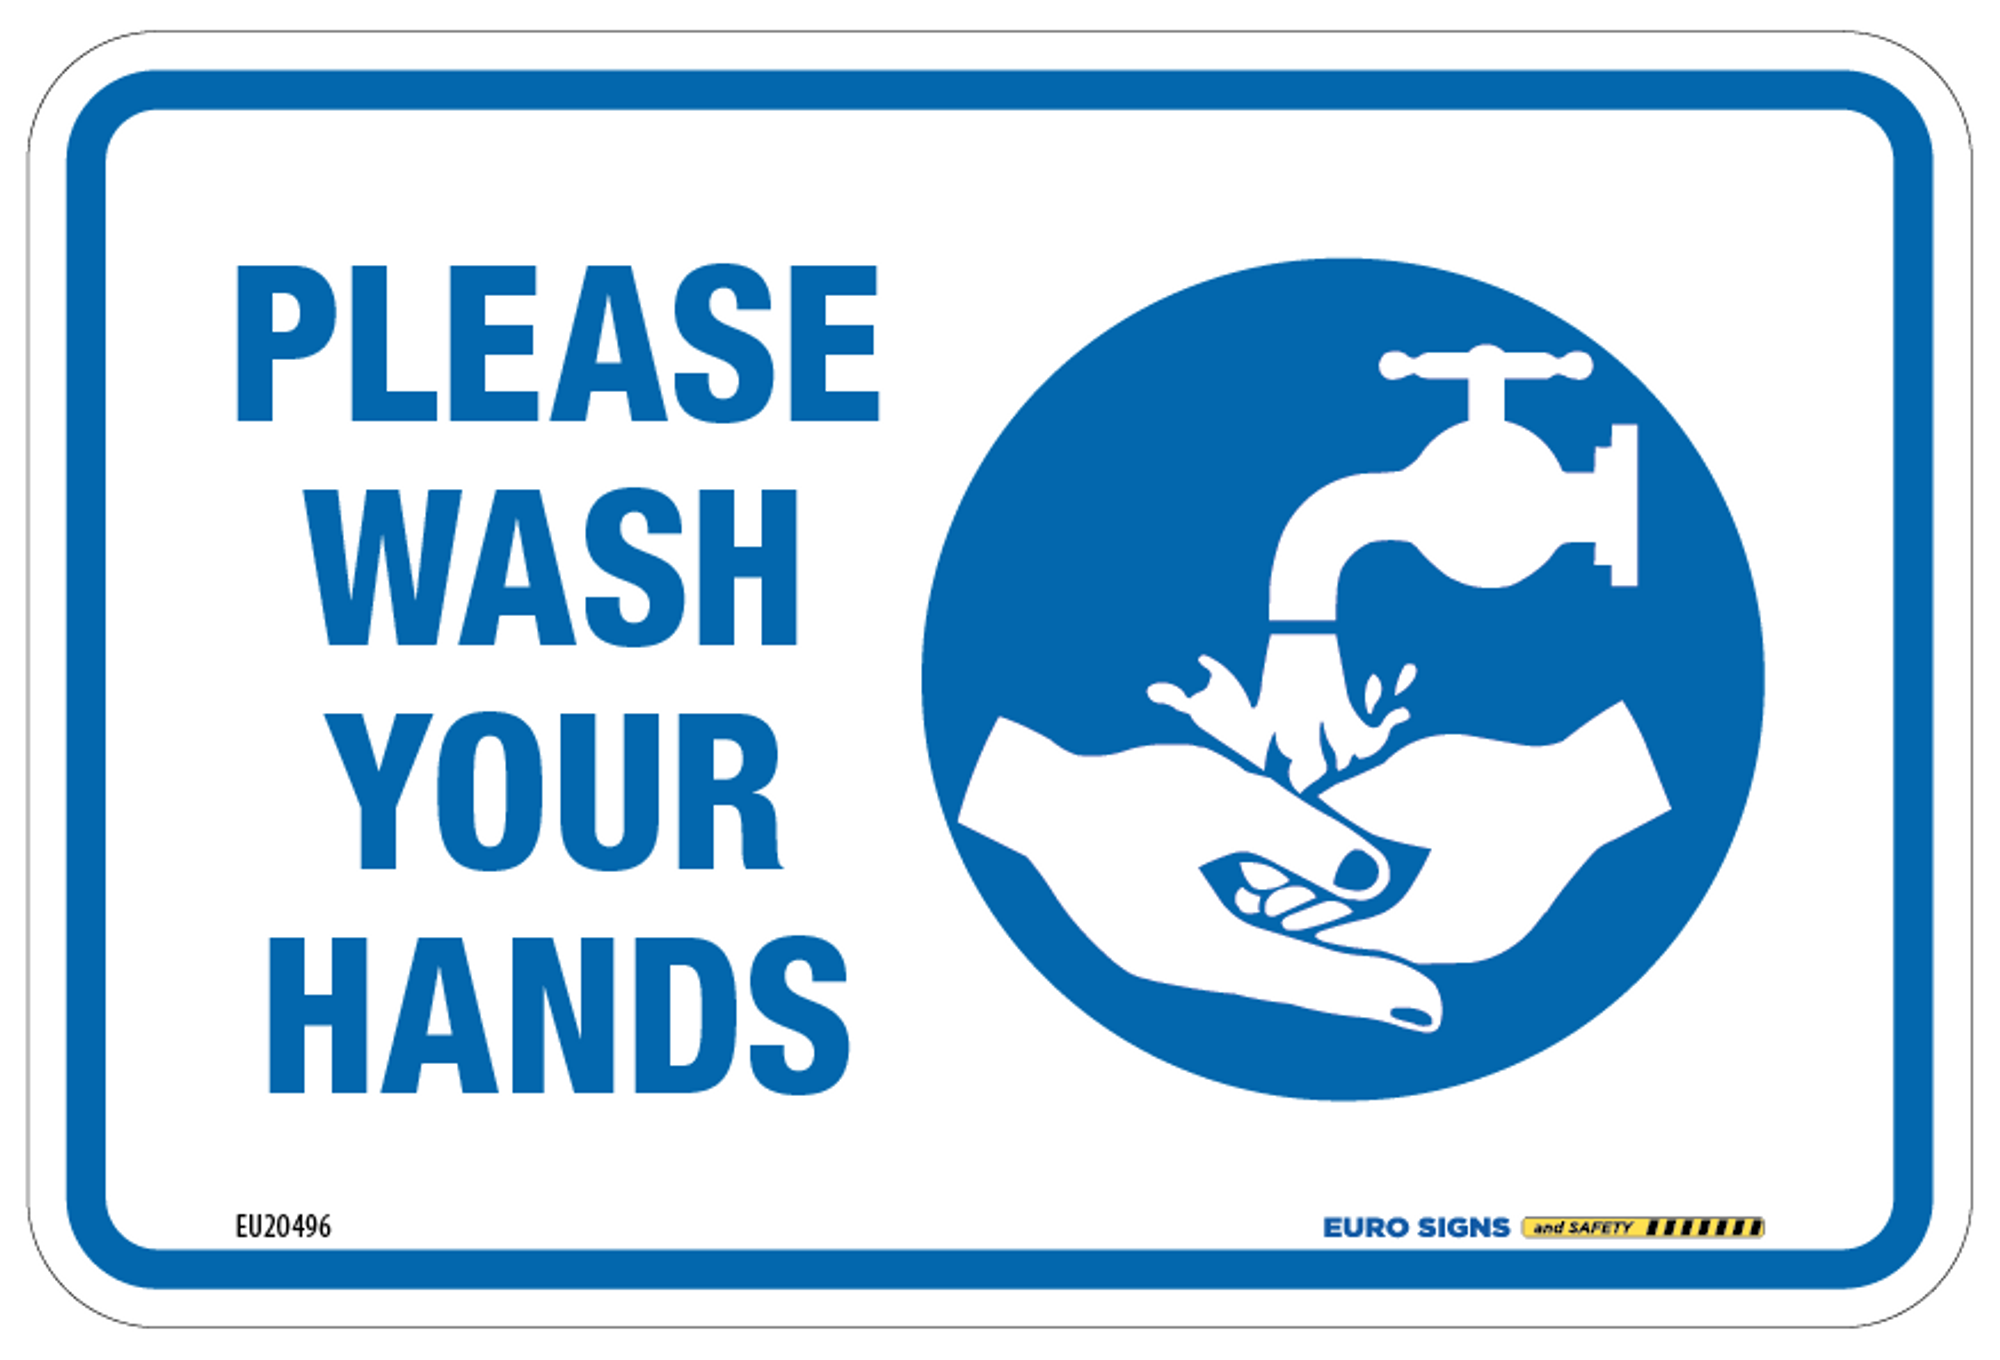 please-wash-your-hands-150x100-decal-euro-signs-and-safety